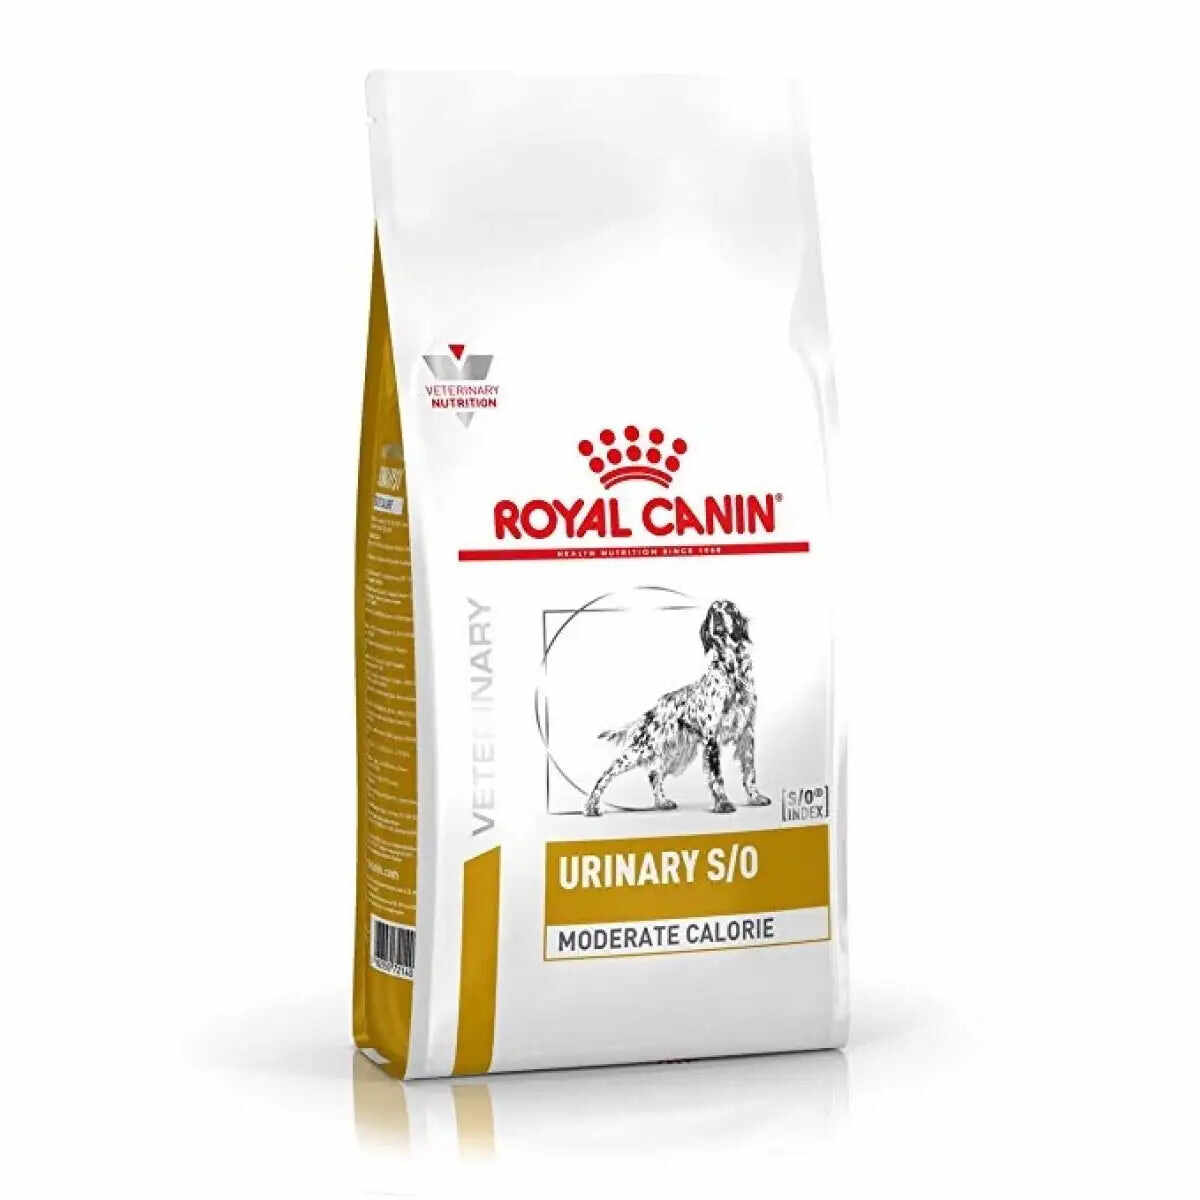 Royal Canin - Canine Urinary S/O Moderate Calorie